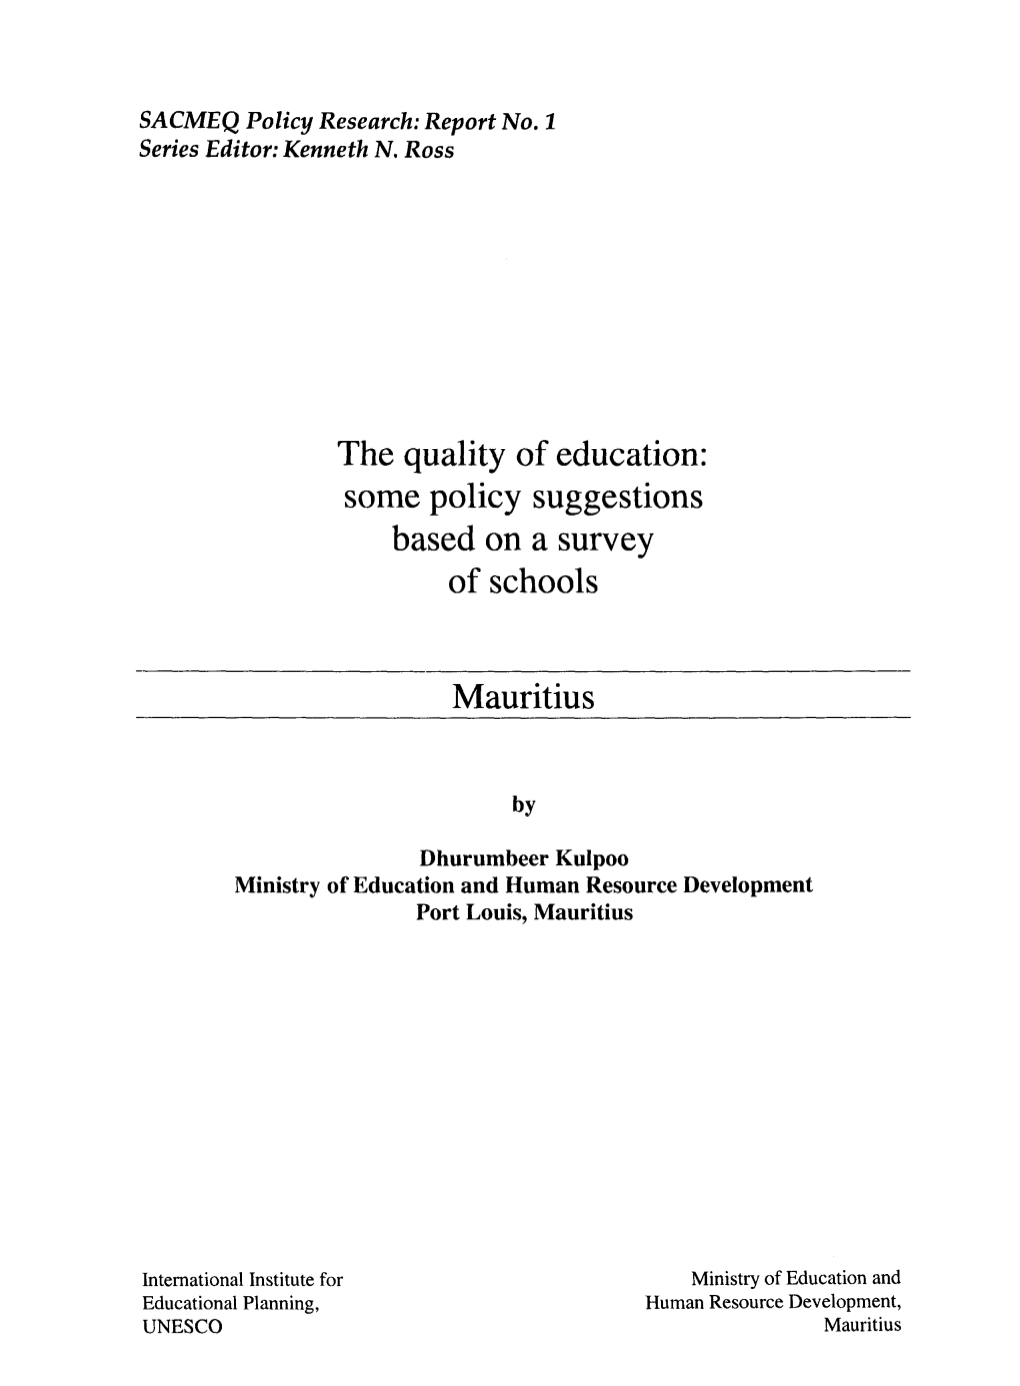 Some Policy Suggestions Based on a Survey of Schools: Mauritius